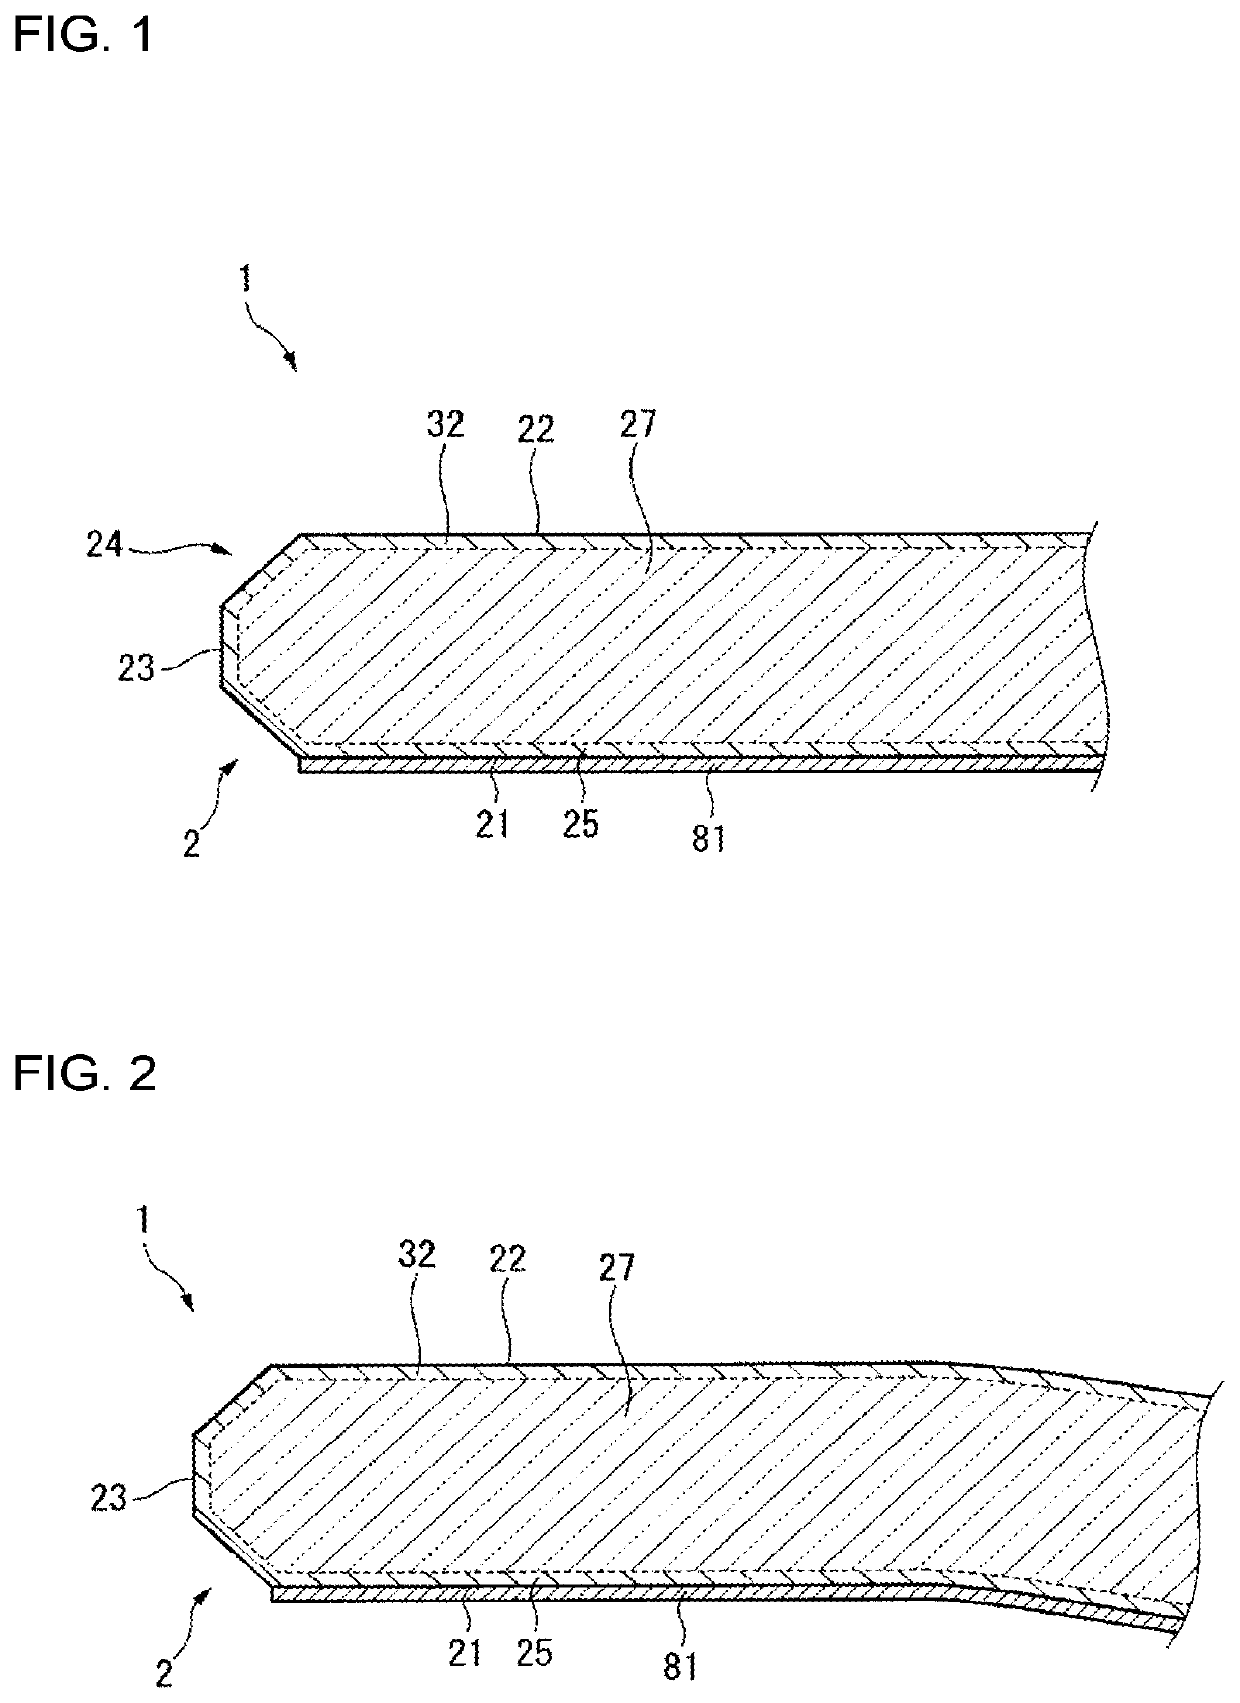 Cover glass and in-cell liquid-crystal display device